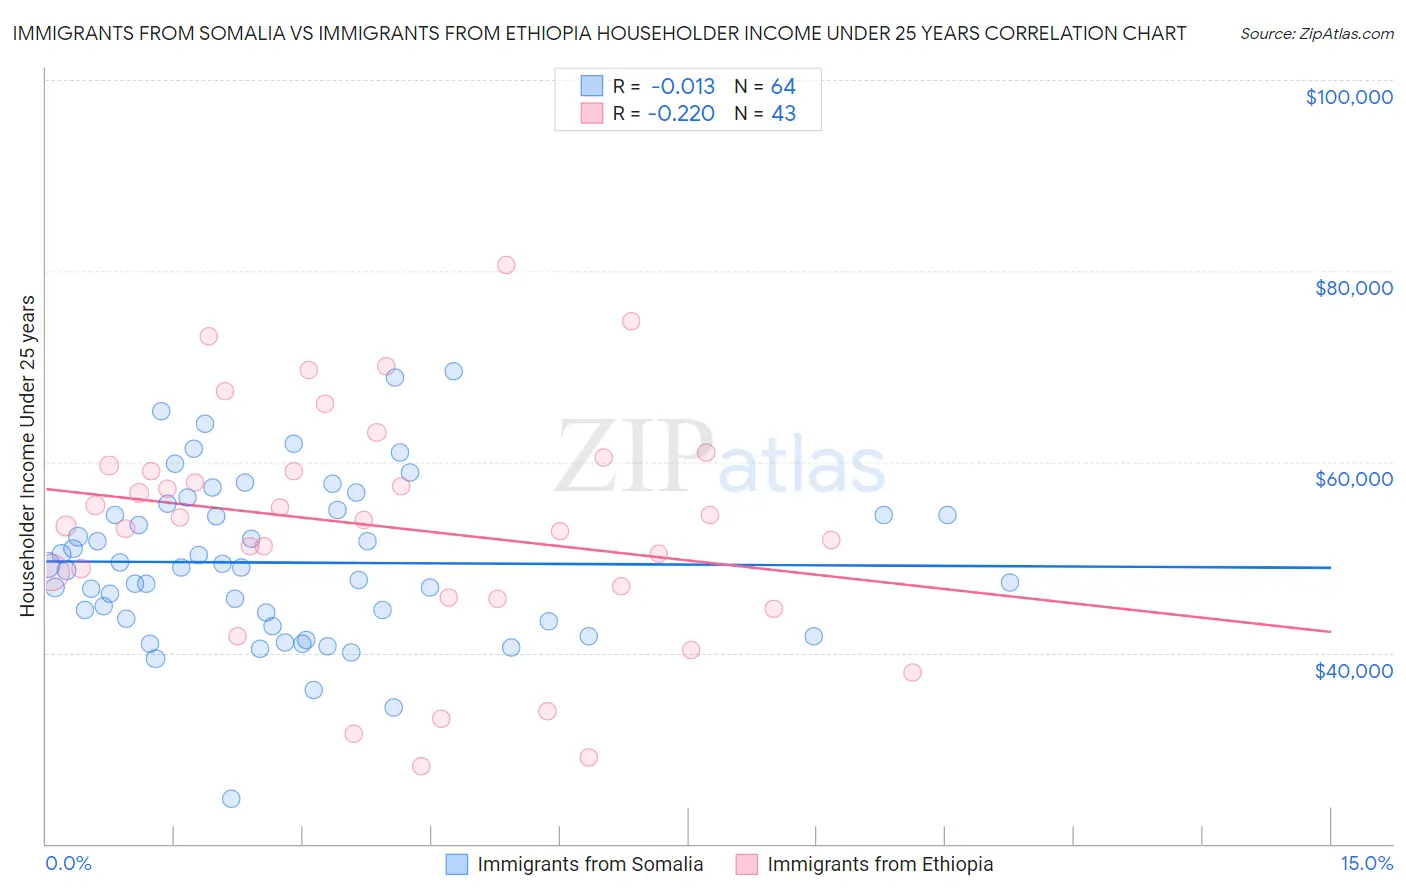 Immigrants from Somalia vs Immigrants from Ethiopia Householder Income Under 25 years